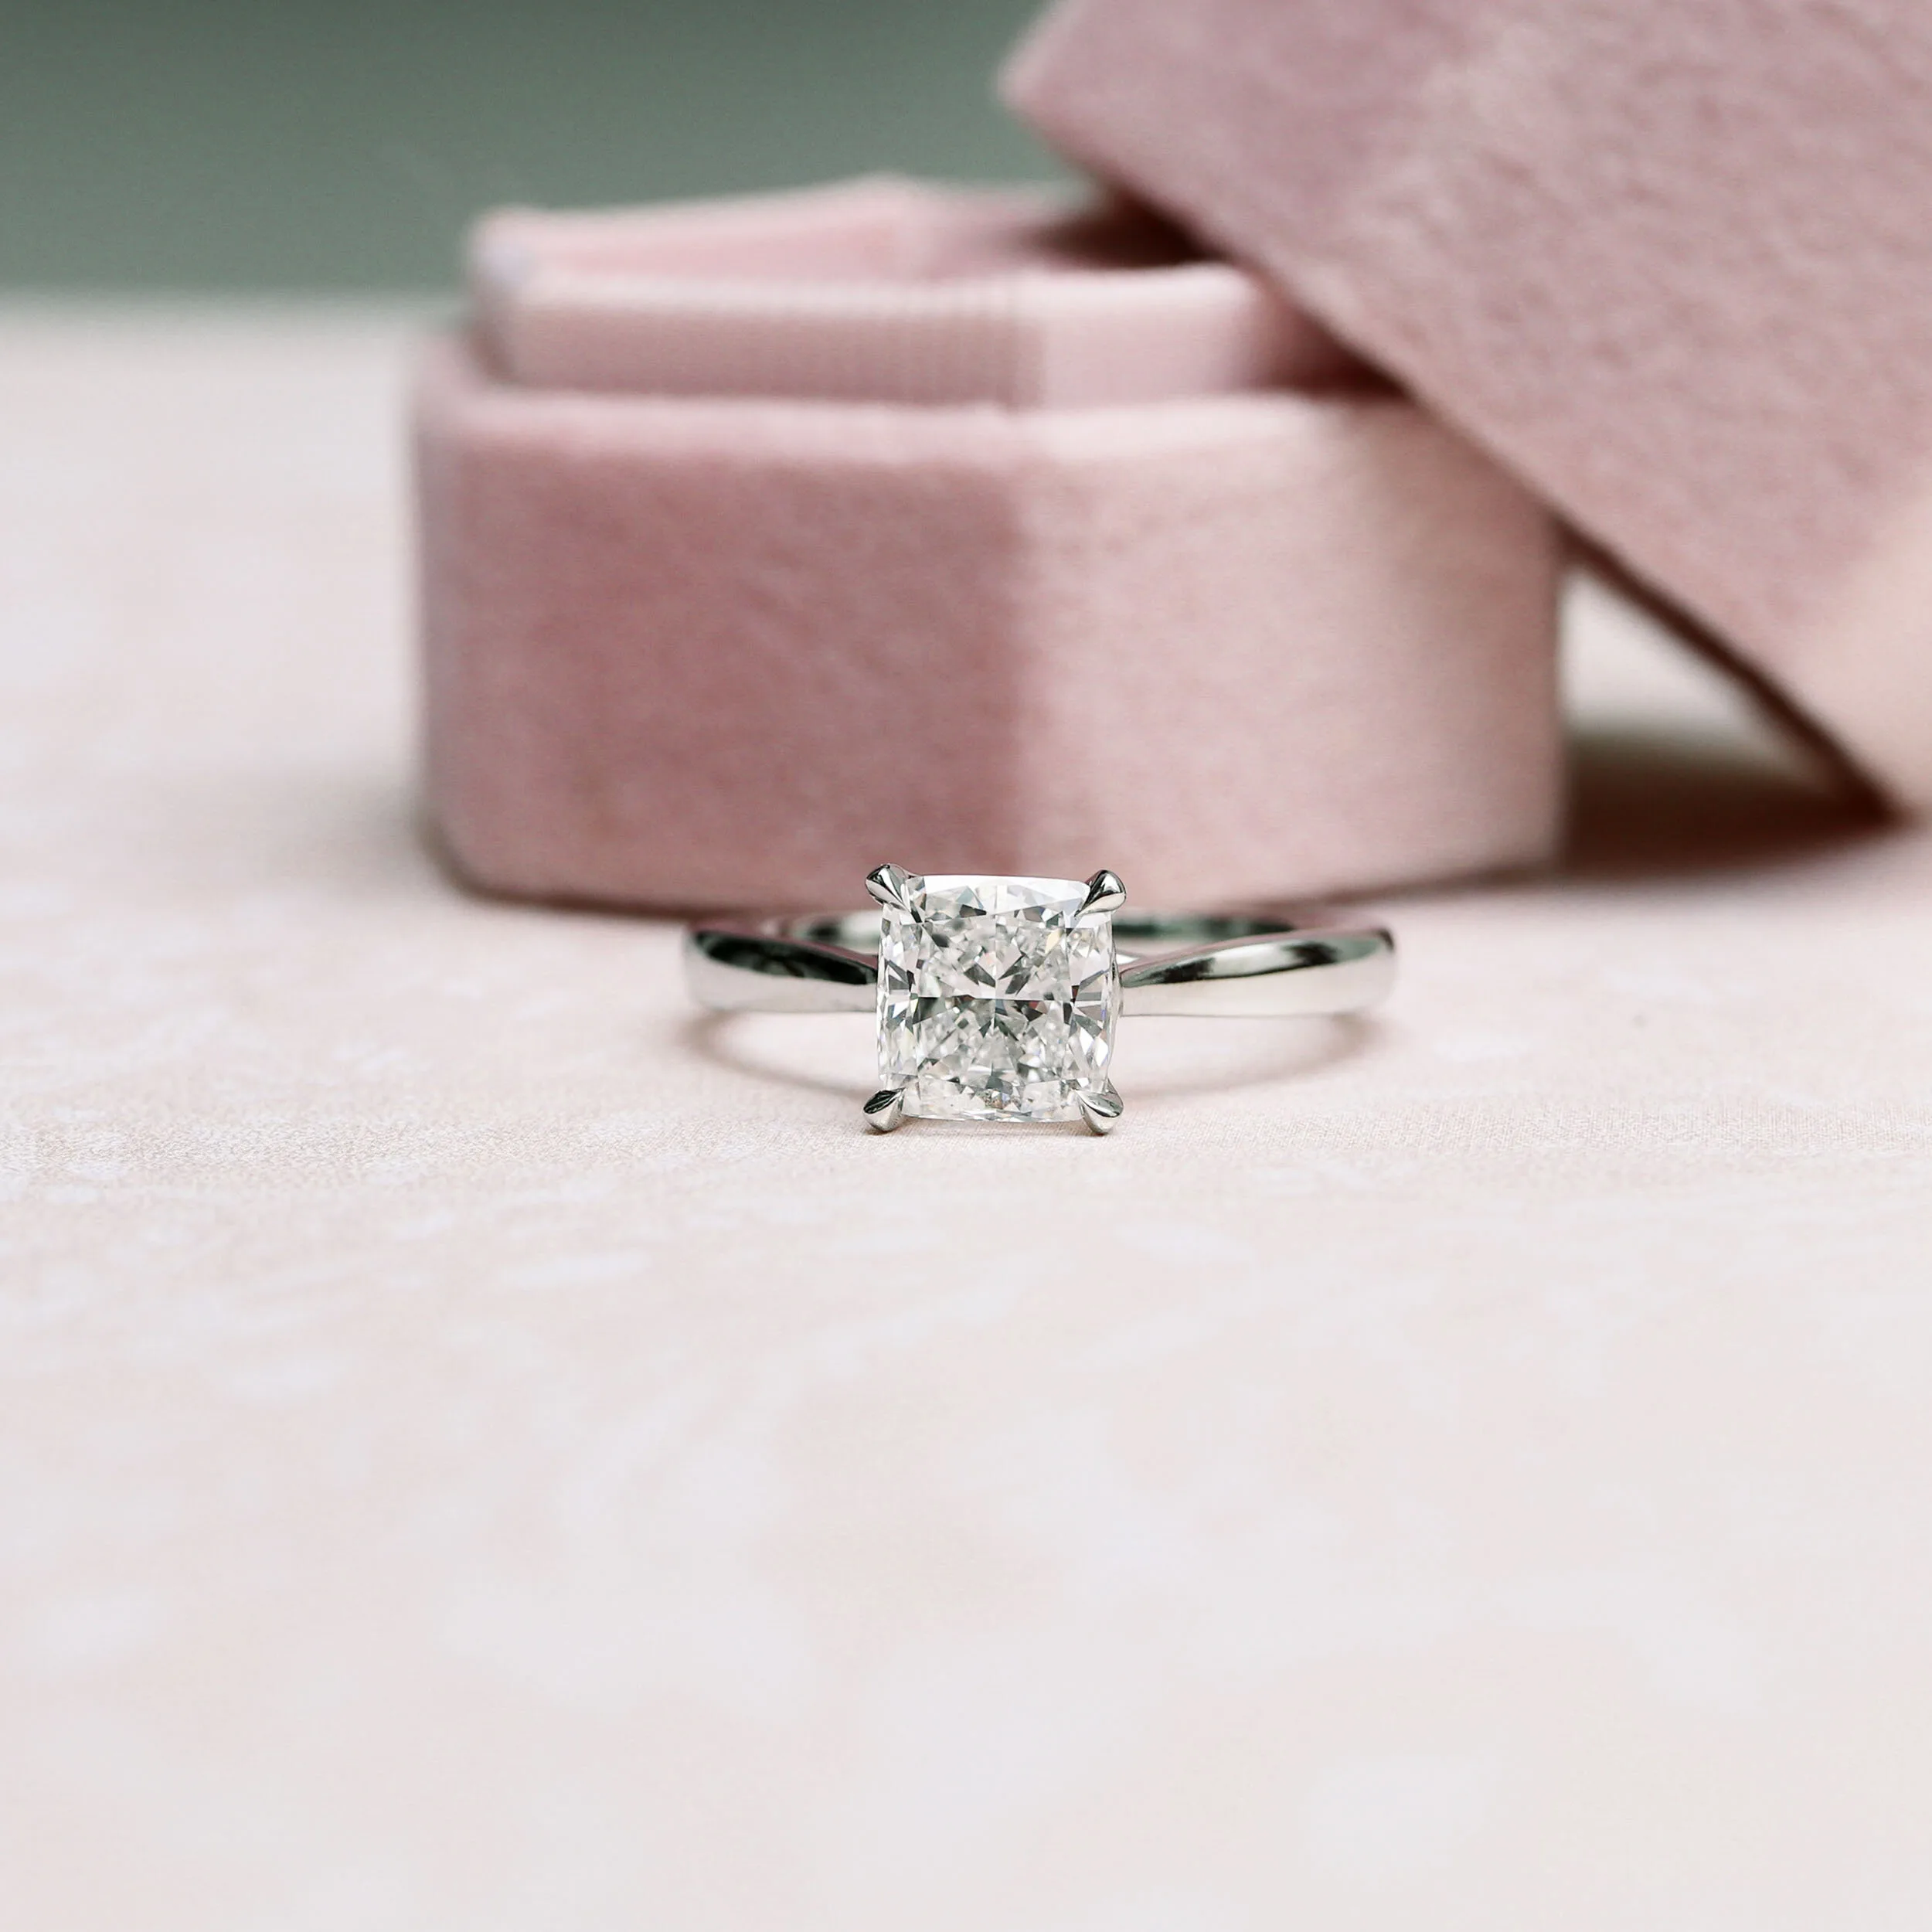 Platinum 1.5 Carat Cushion Cut Open Cathedral Solitaire Lab Diamond Engagement Ring with Tapered Band Ada Diamonds Design Number AD-147 Macro Shot